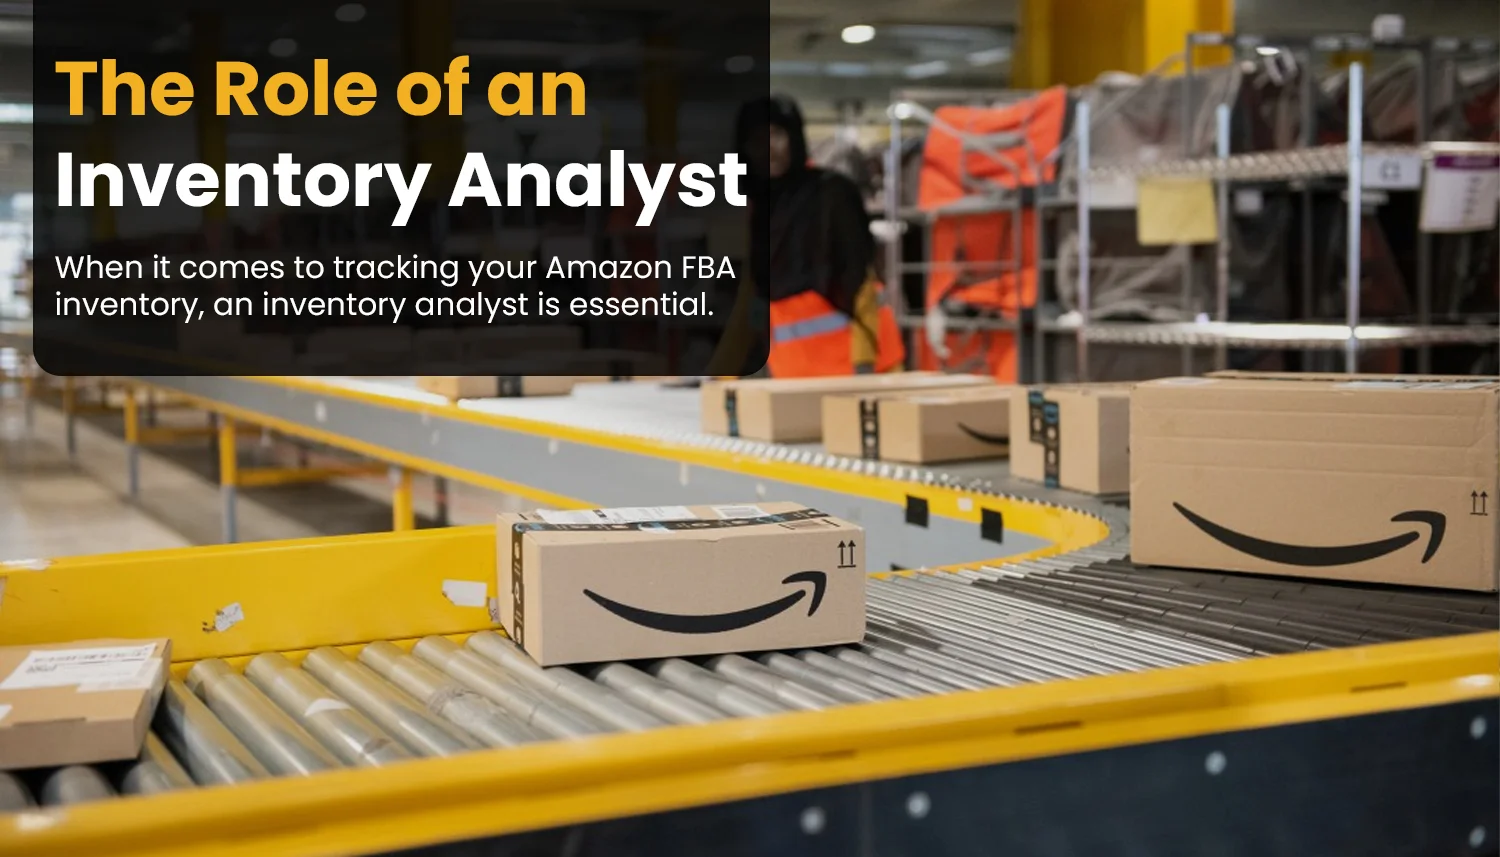 The Role of an Inventory Analyst